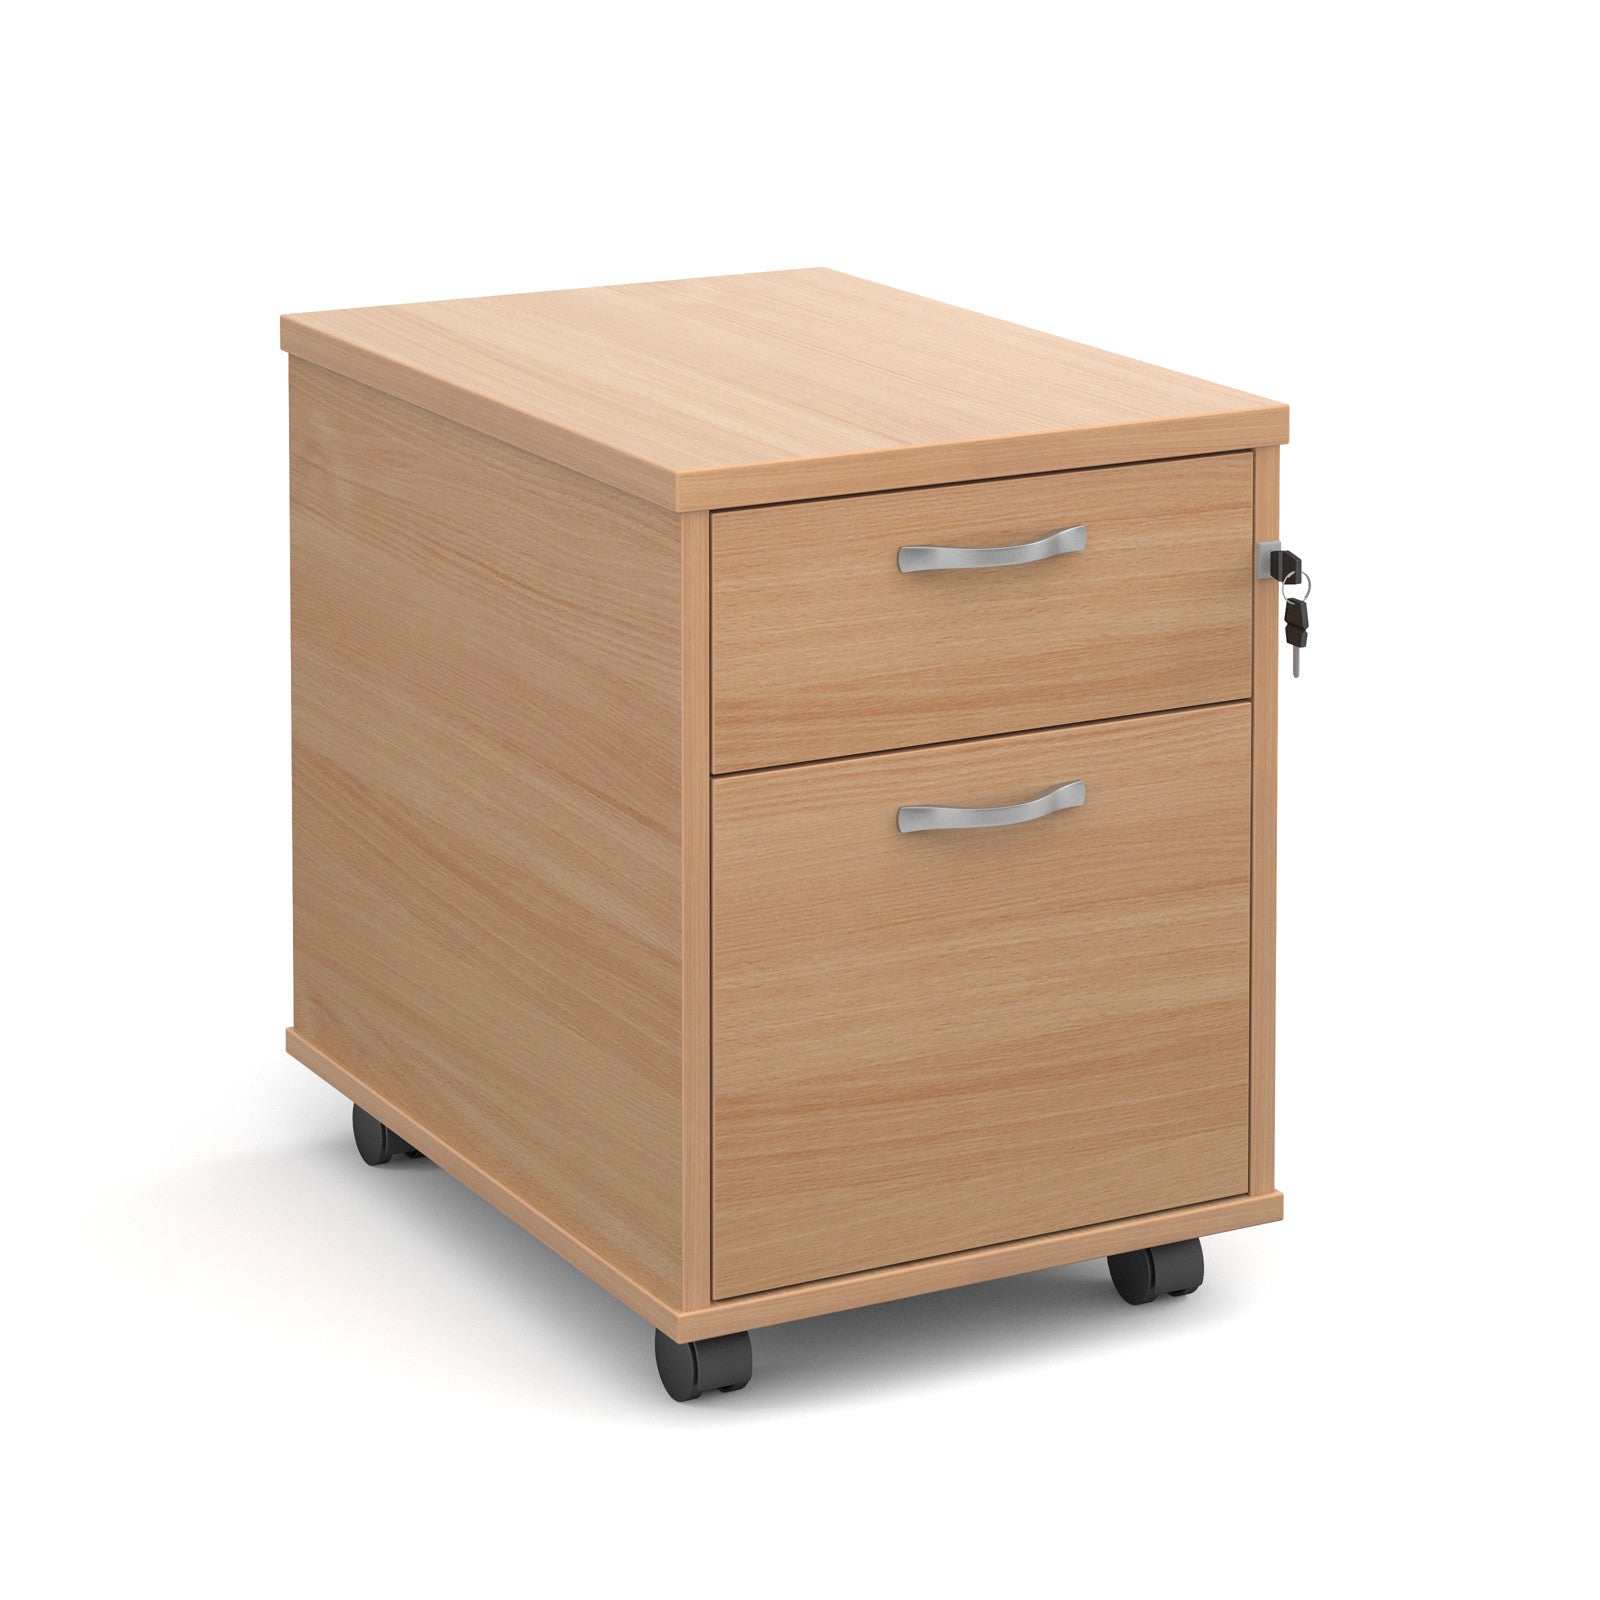 Maestro 2 3 Drawer Mobile Pedestal With Handles Zilo Furniture